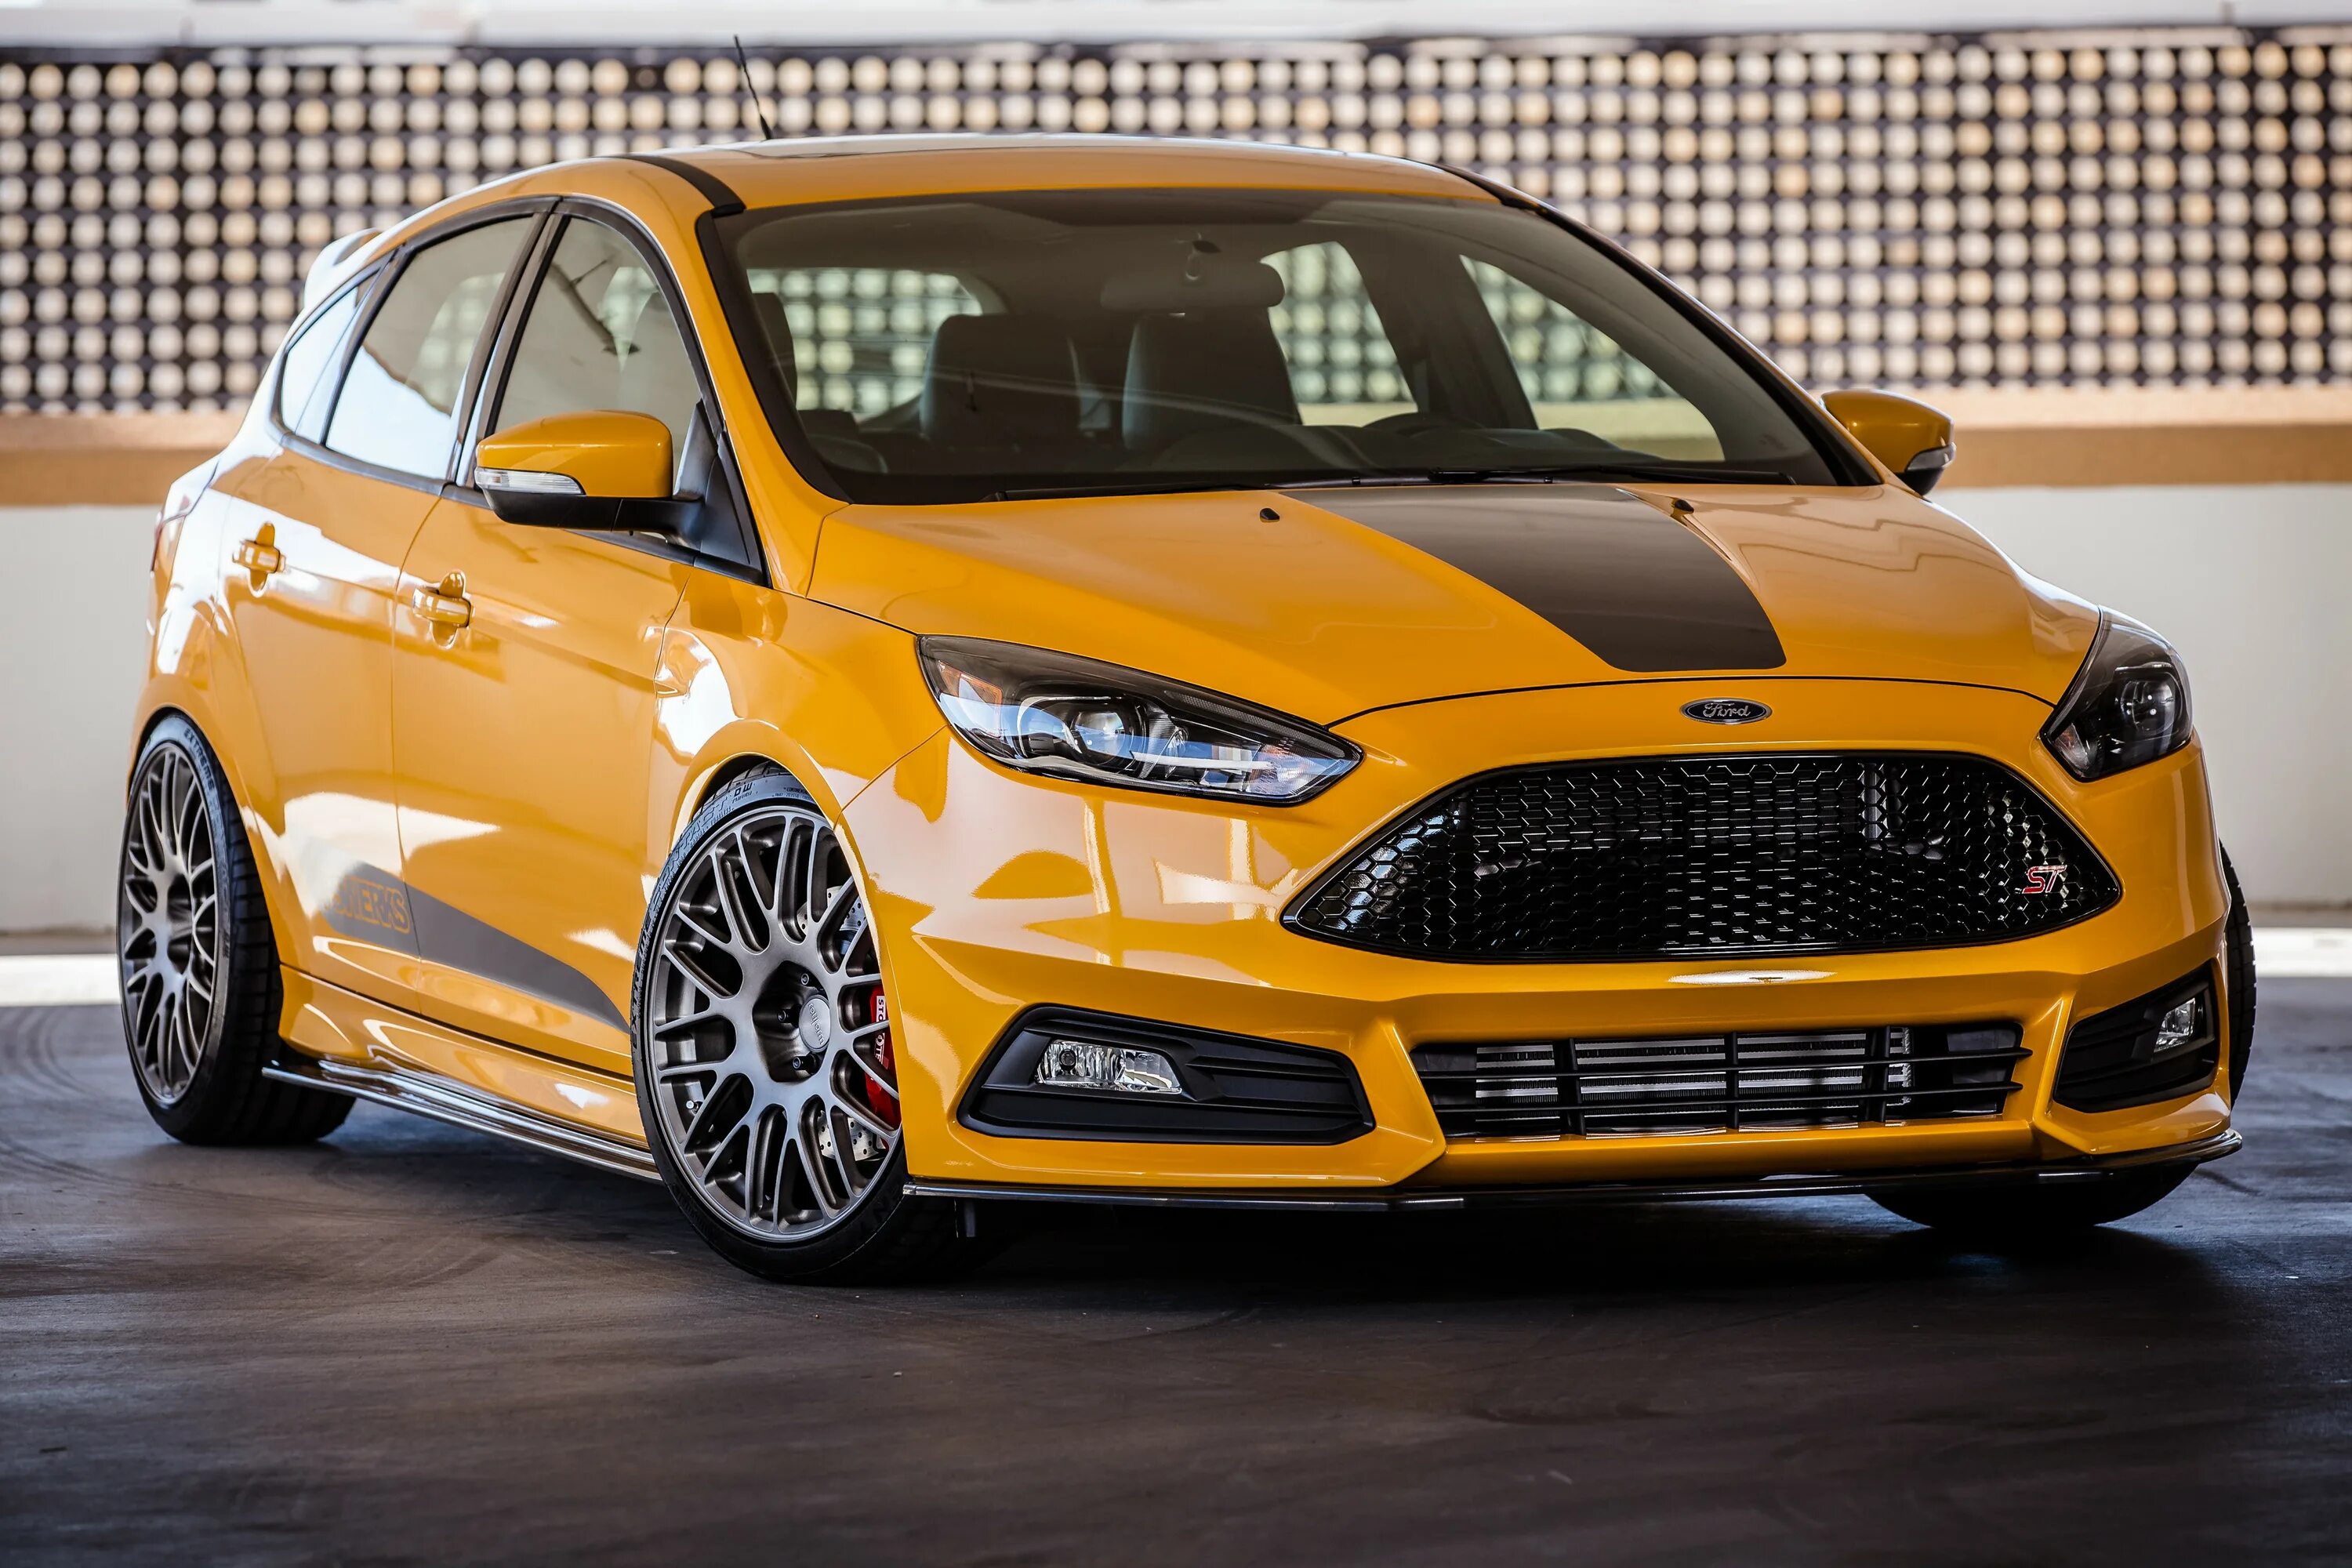 Ст тюнинг. Ford Focus St 2015. Форд фокус St 2015. Ford Focus St Tuning. Ford Focus желтый.